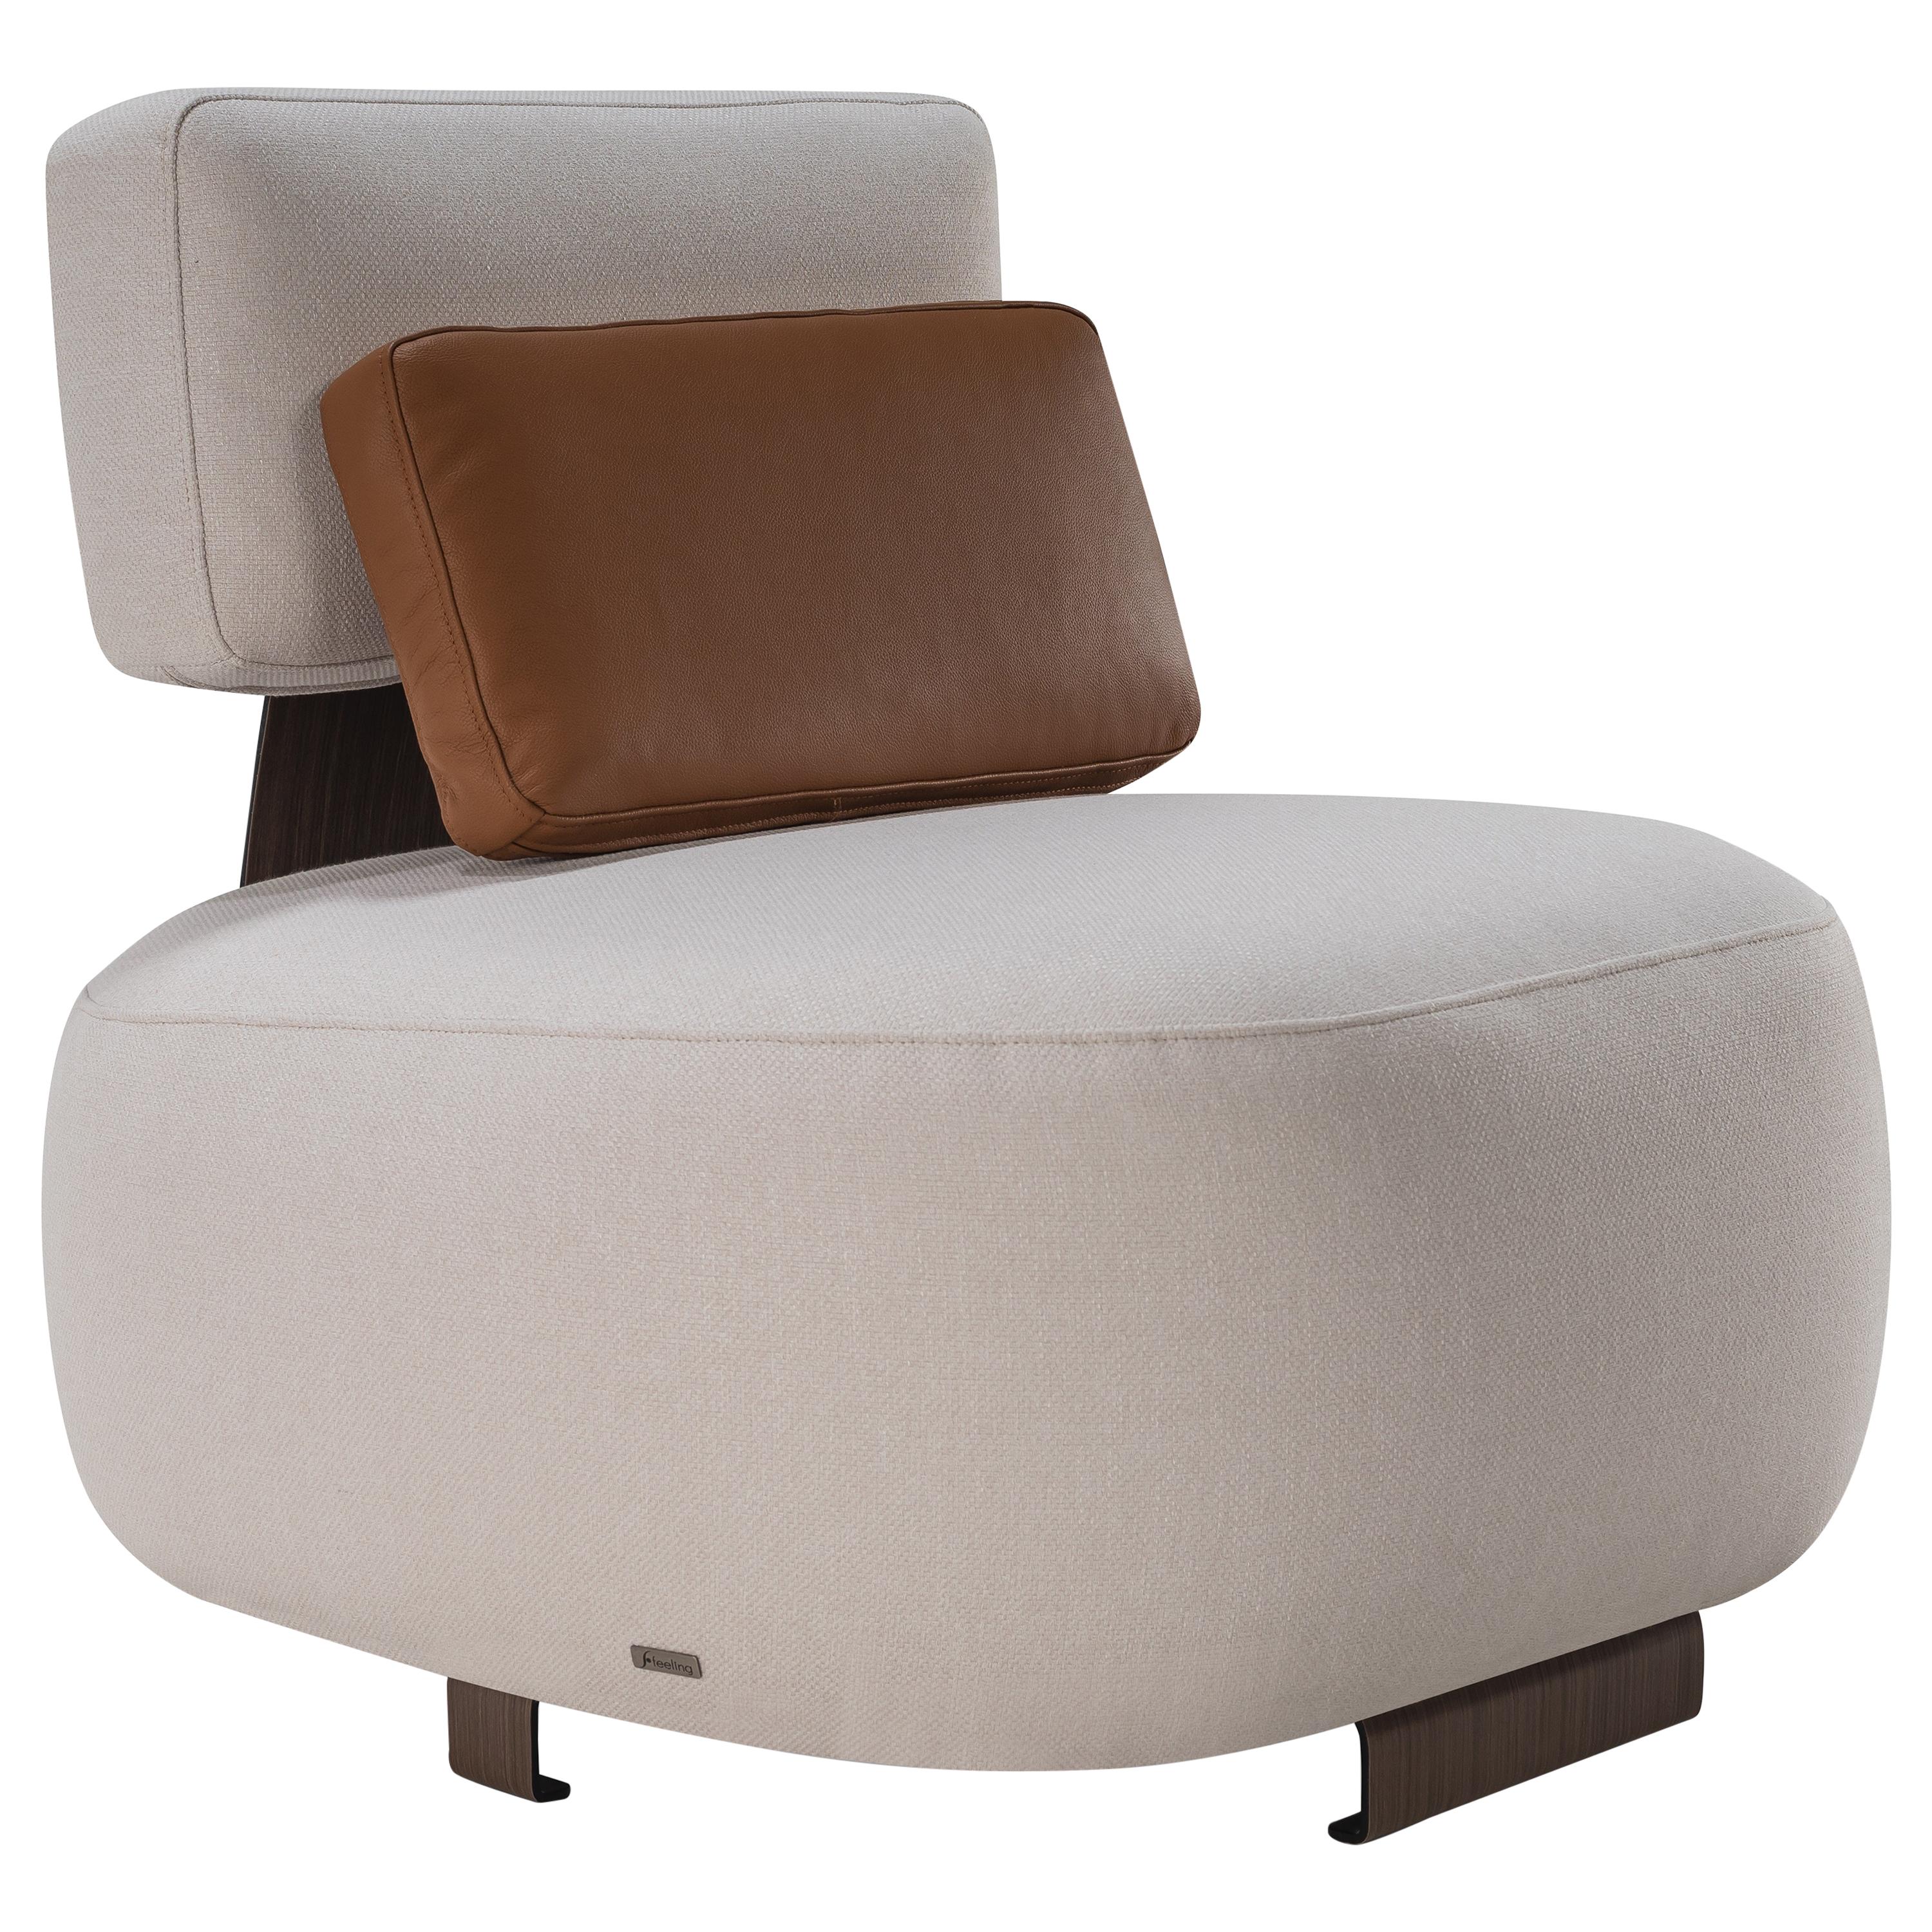 Armchair Winding Fixed, Color Off-White and Kidney Pillow Caramel For Sale